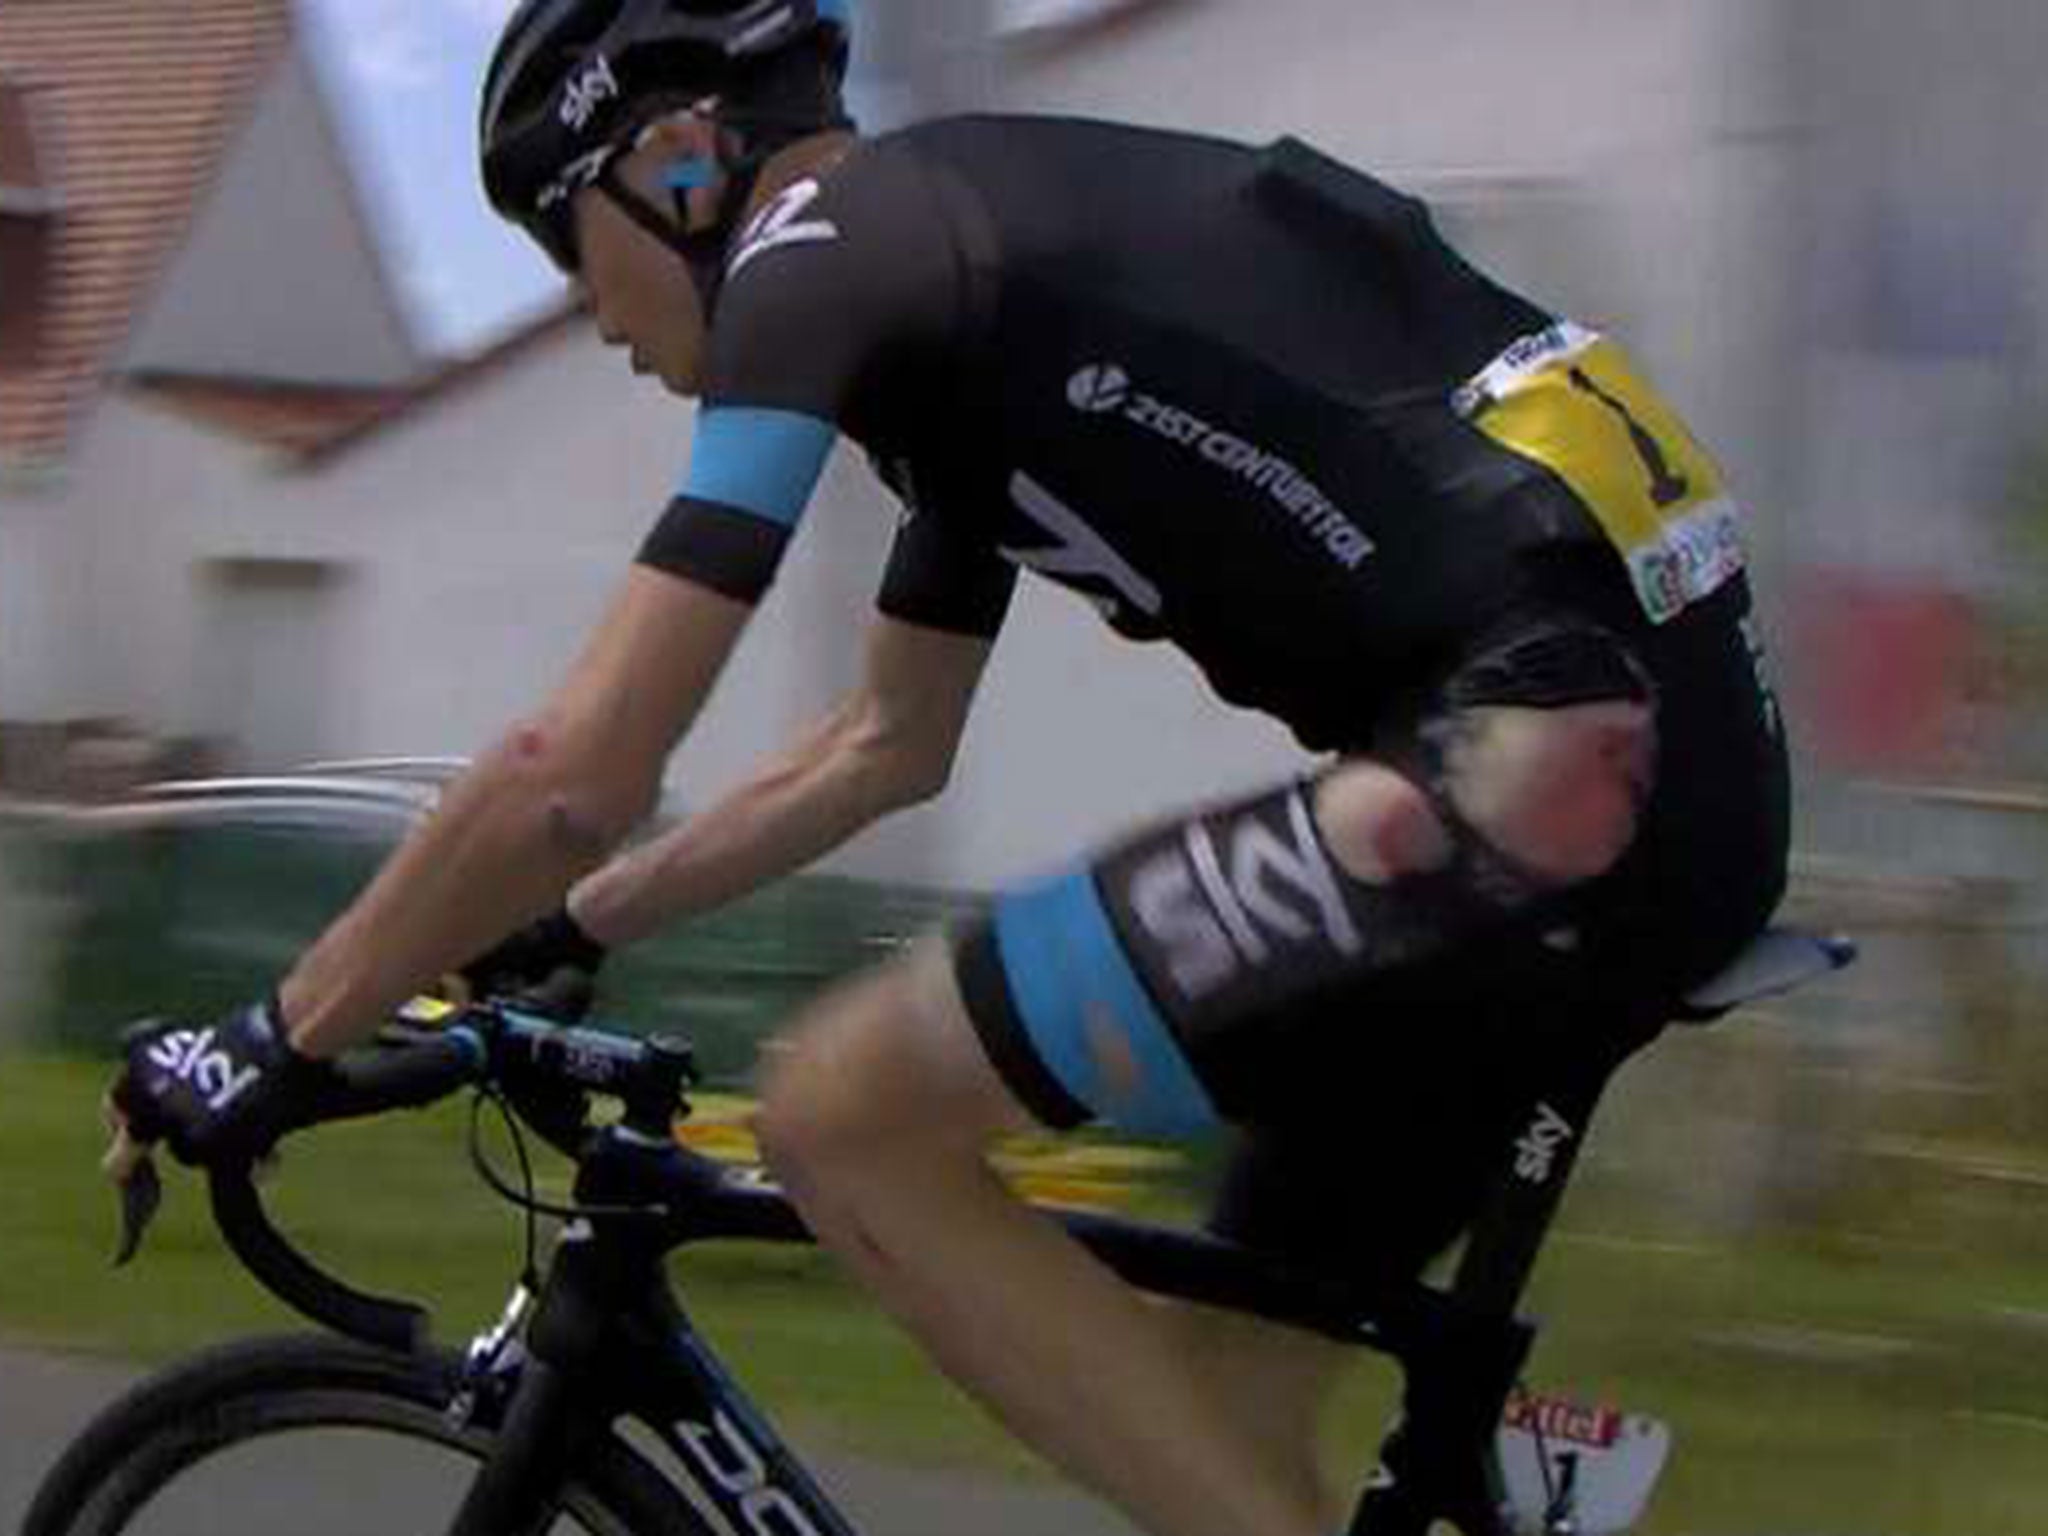 Chris Froome continued on stage four, but was showing the effects of the crash he suffered early on